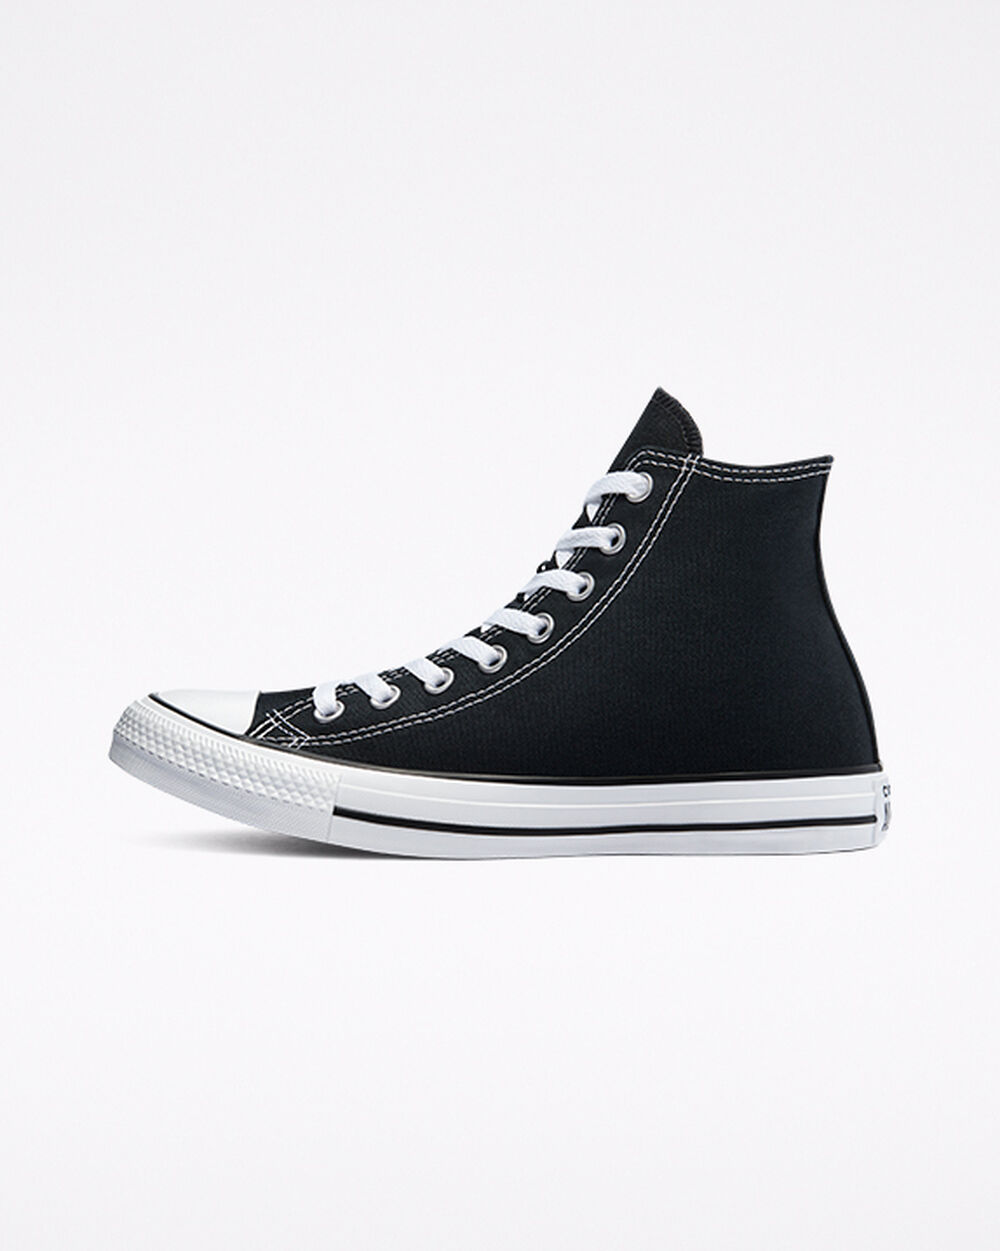 Tenis Converse Chuck Taylor All Star Mujer Negros | Mexico-643056